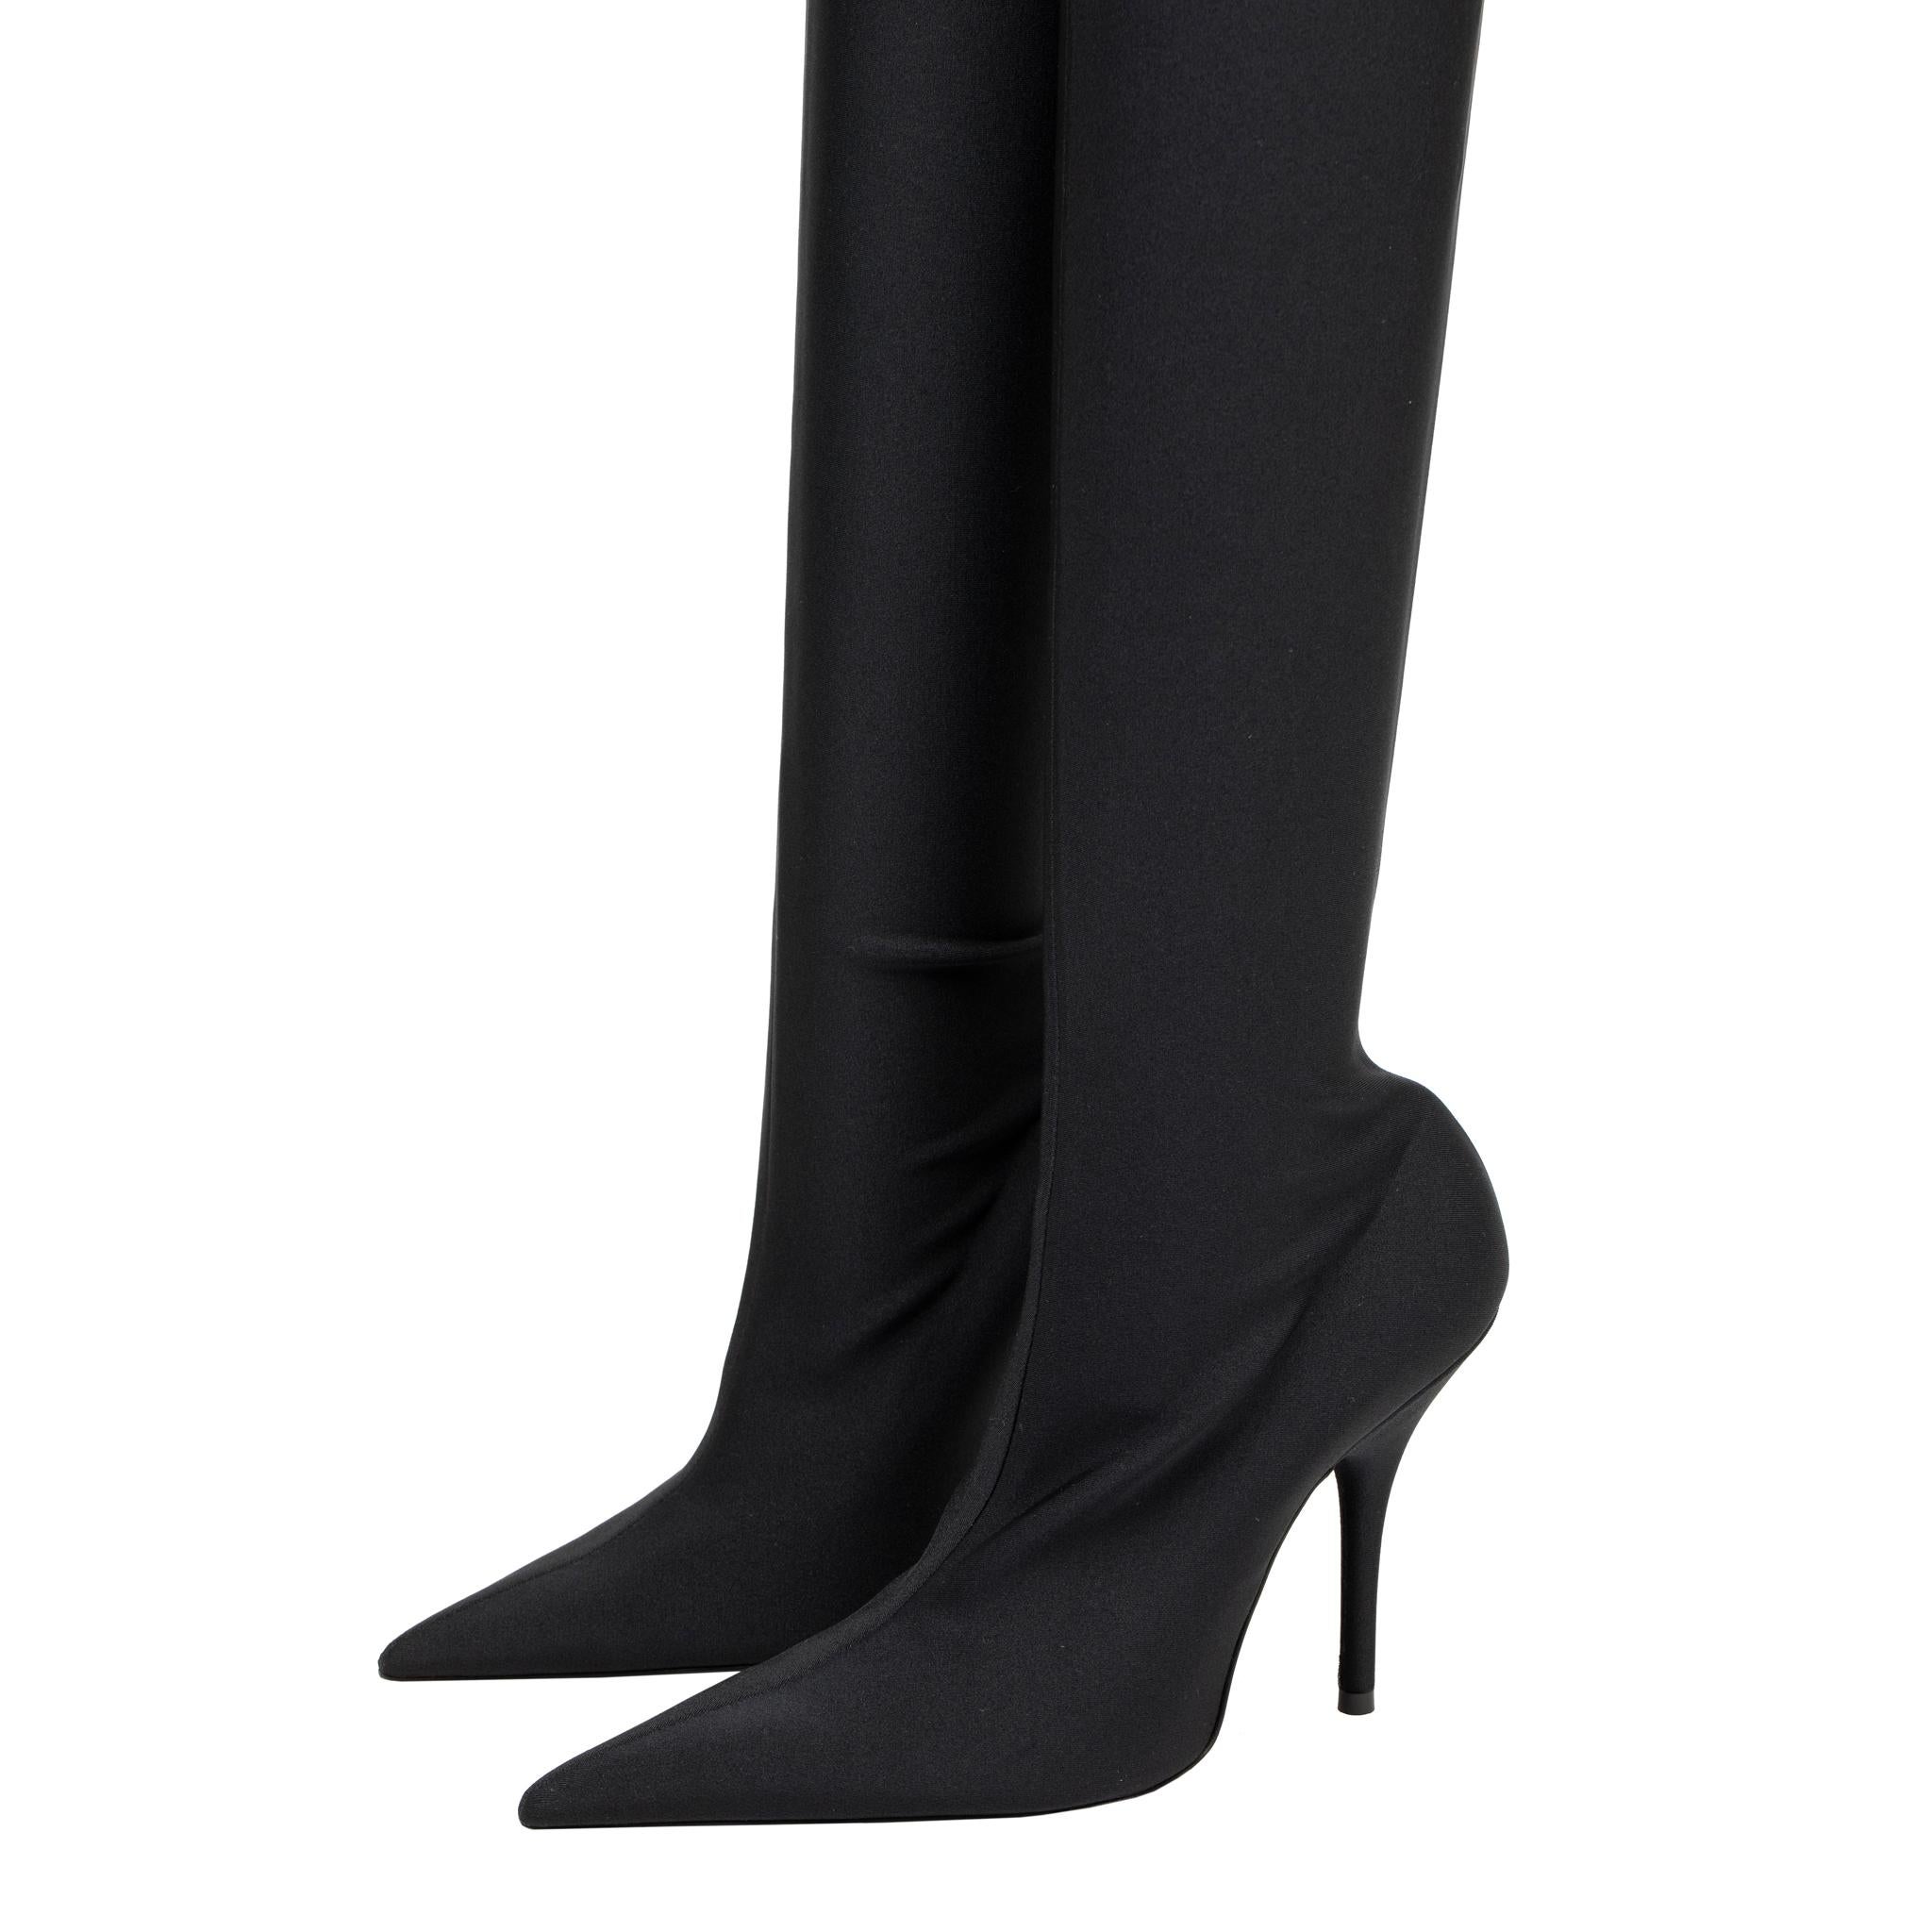 Balenciaga Stretch Knit Knife Thigh High Boot Black 36 FR In Excellent Condition For Sale In DOUBLE BAY, NSW